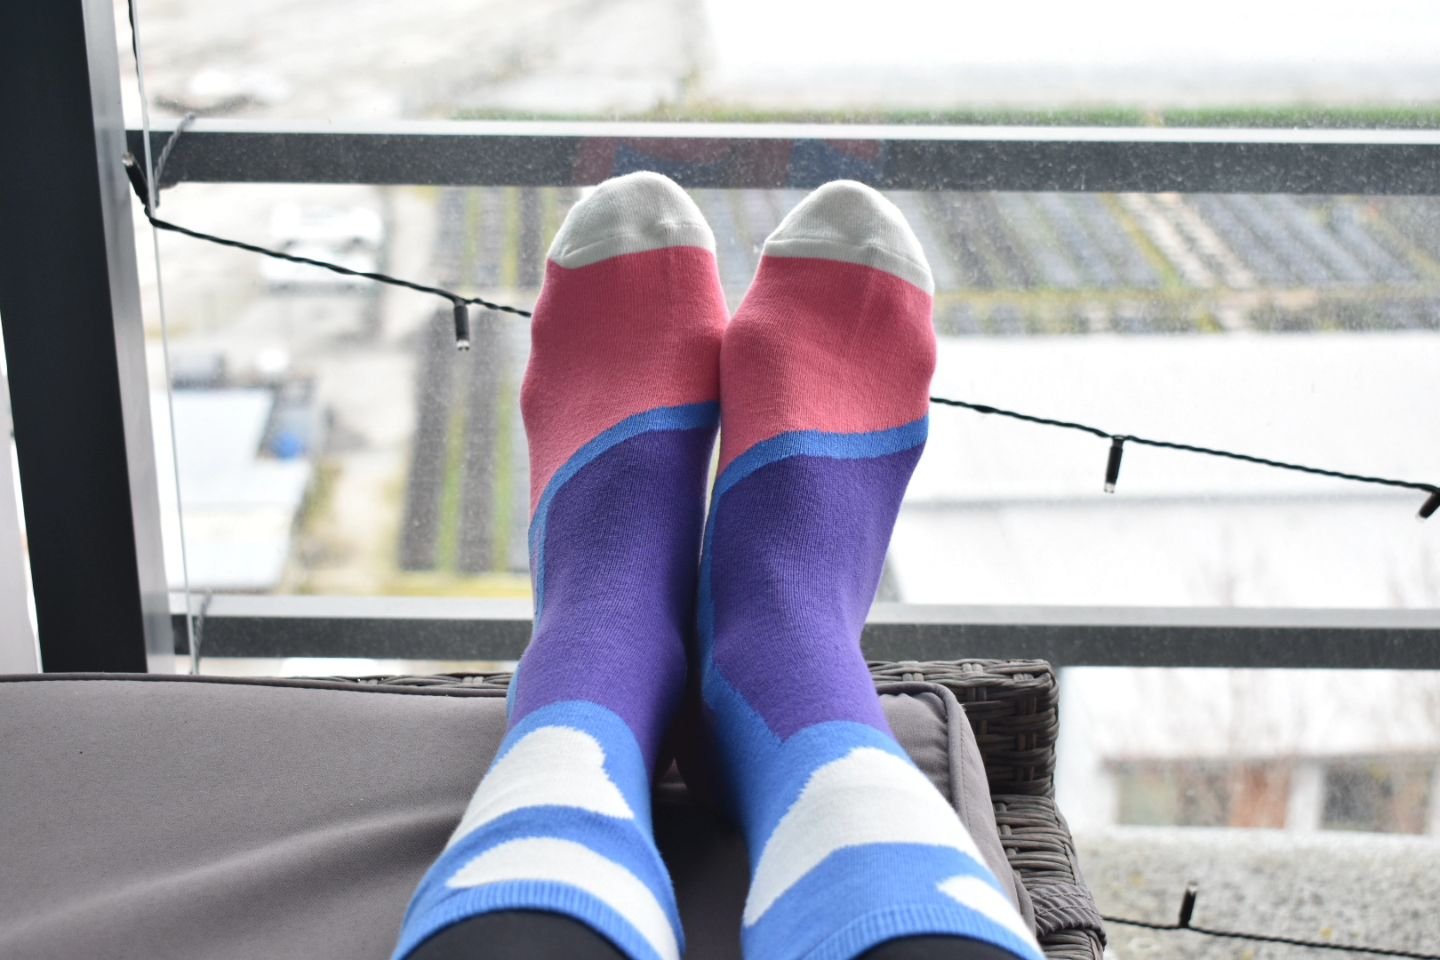 Ready for the weekend. See you soon #eastvan at the spring @gotcraftmarket on May 4-5 &amp; #edmonton at the May 10-12 spring @oddbirdfair! 

#springmarkets #yvr #yeg #sockpack #sockgame #socks